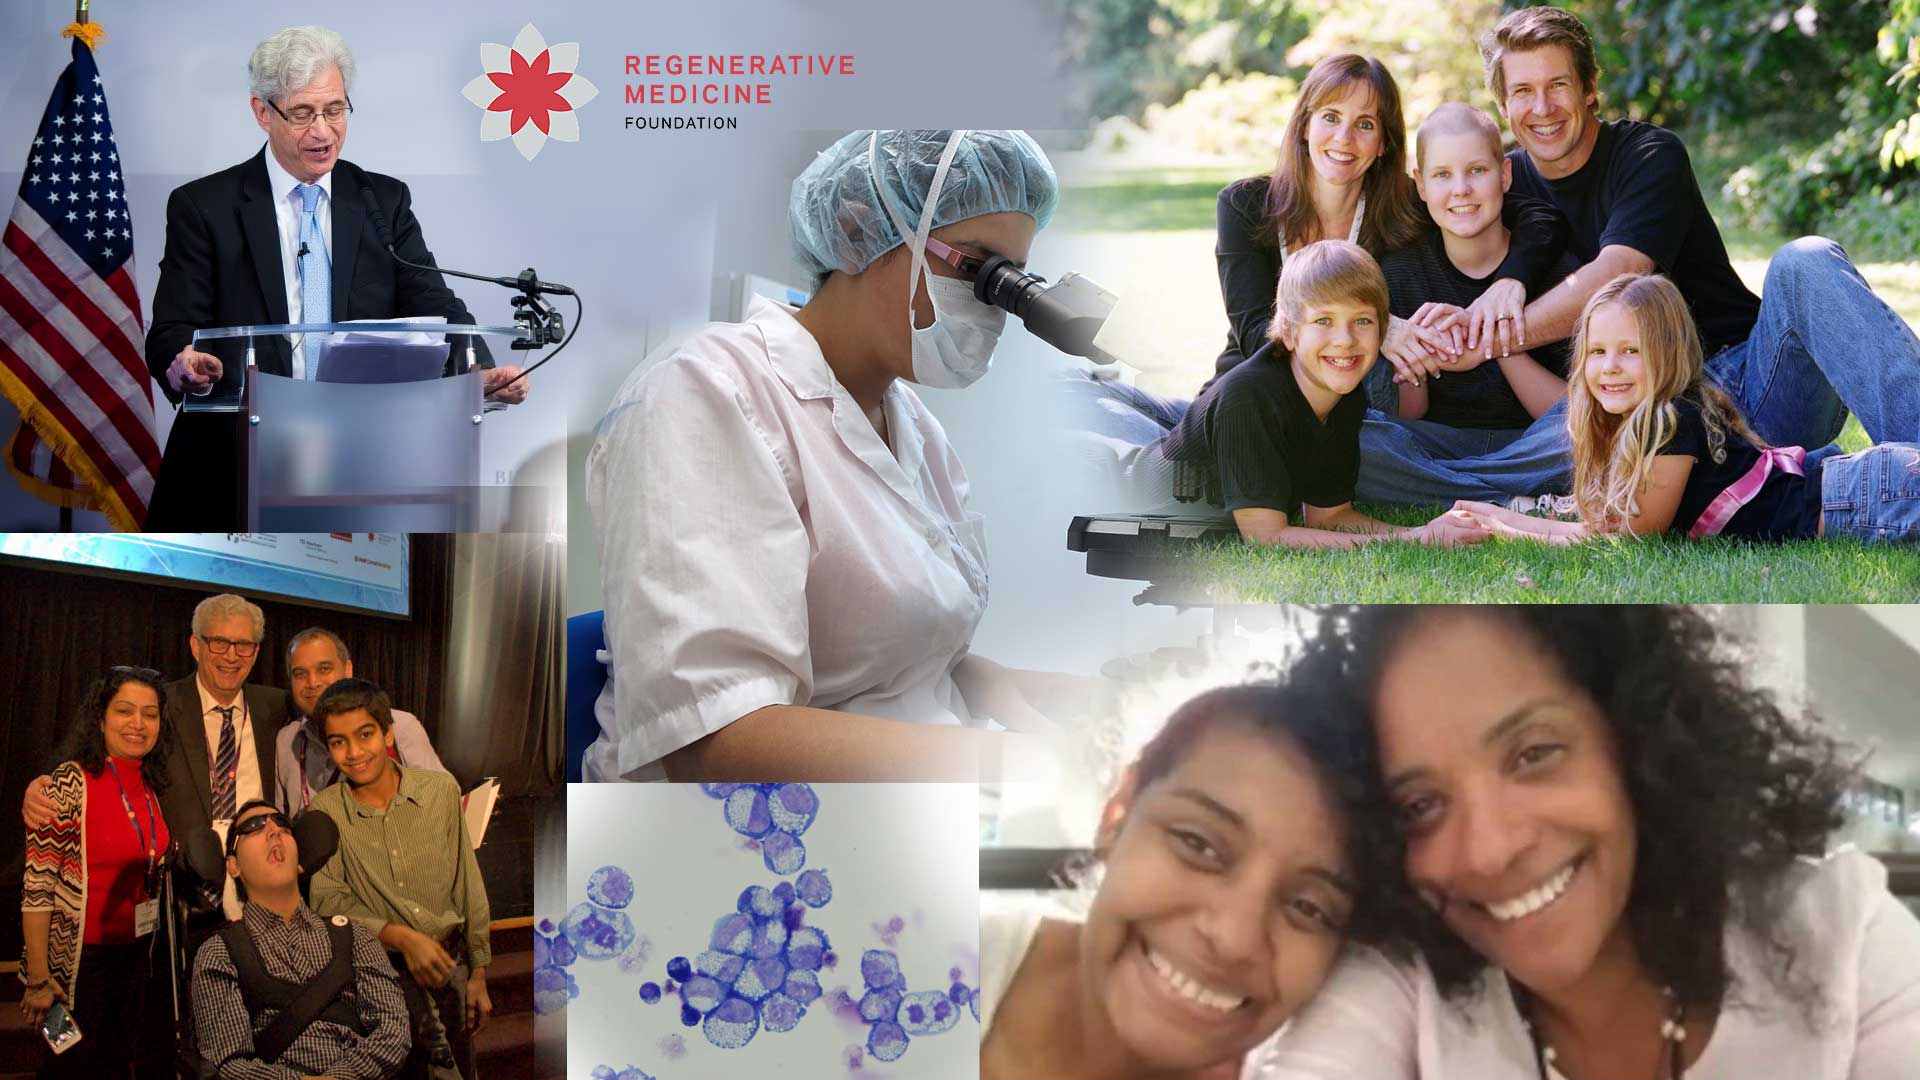 FOR THE FIRST TIME REGENERATIVE MEDICINE FOUNDATION IS OFFERING MEMBERSHIPS